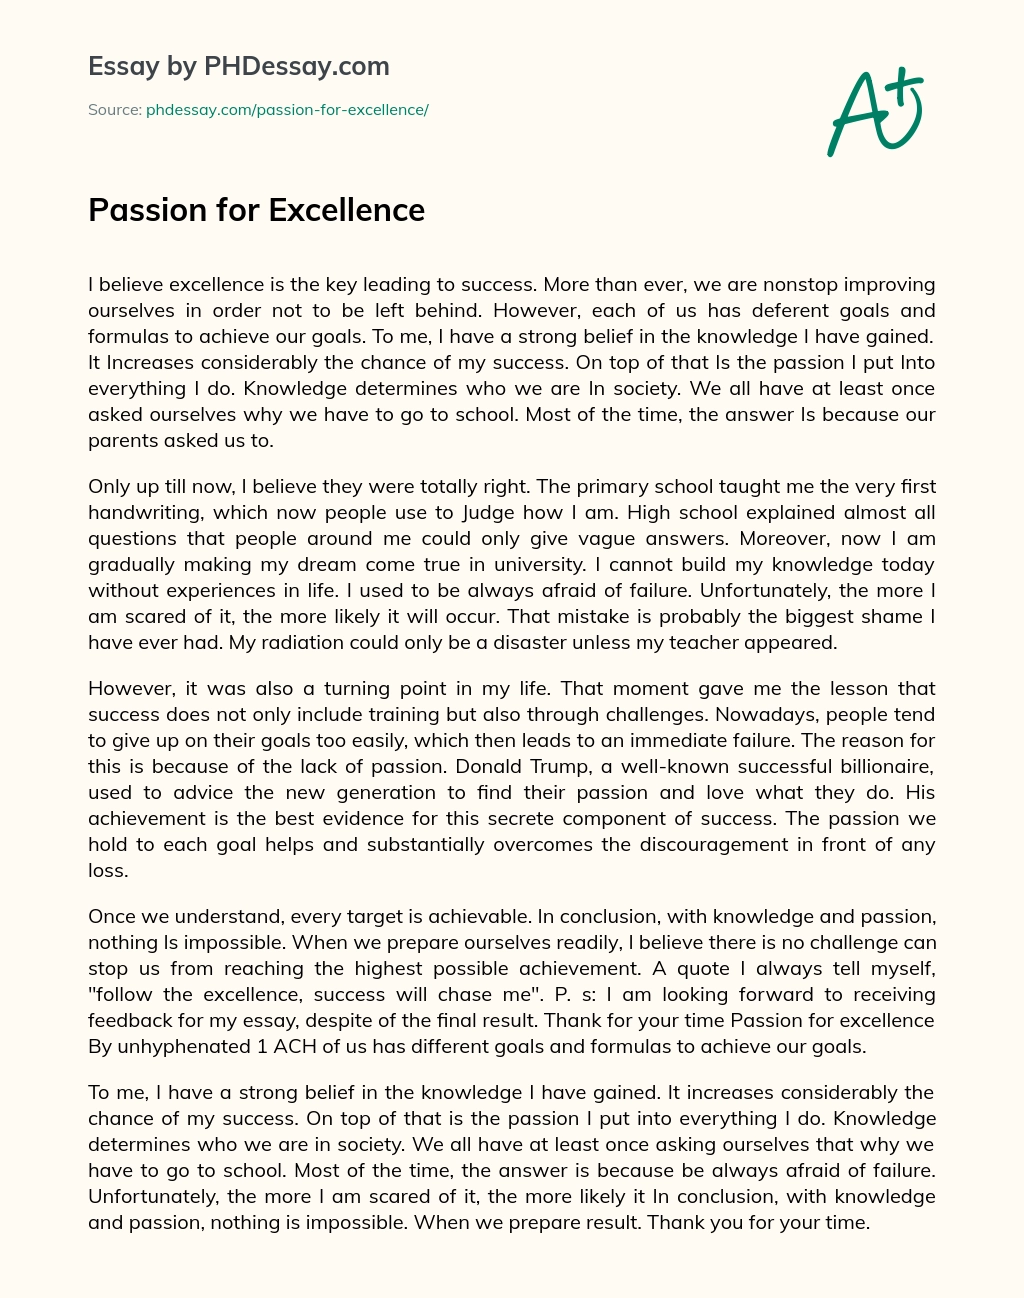 Passion for Excellence essay